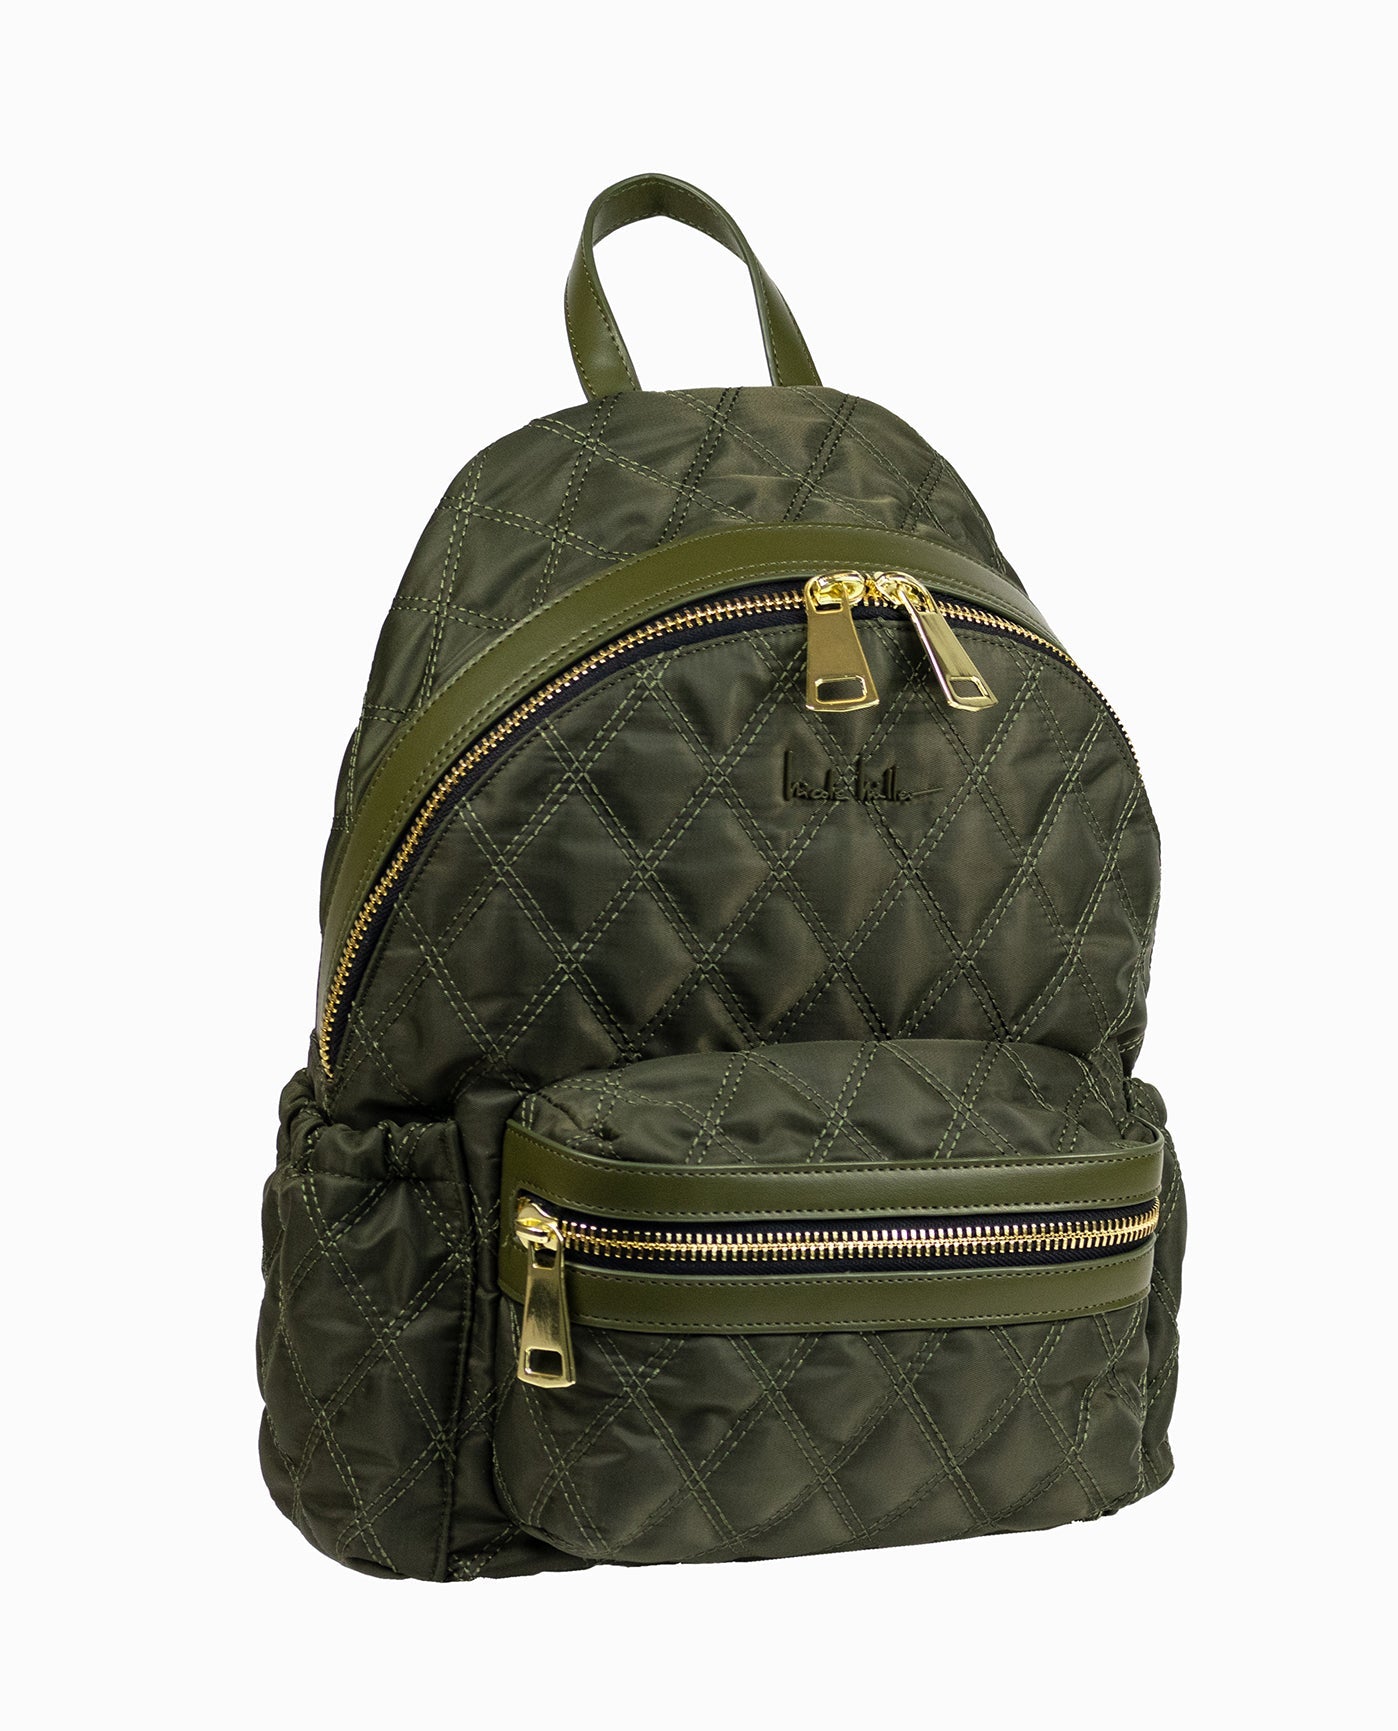 Urban Expressions Quilted Backpack | Foxvalley Mall